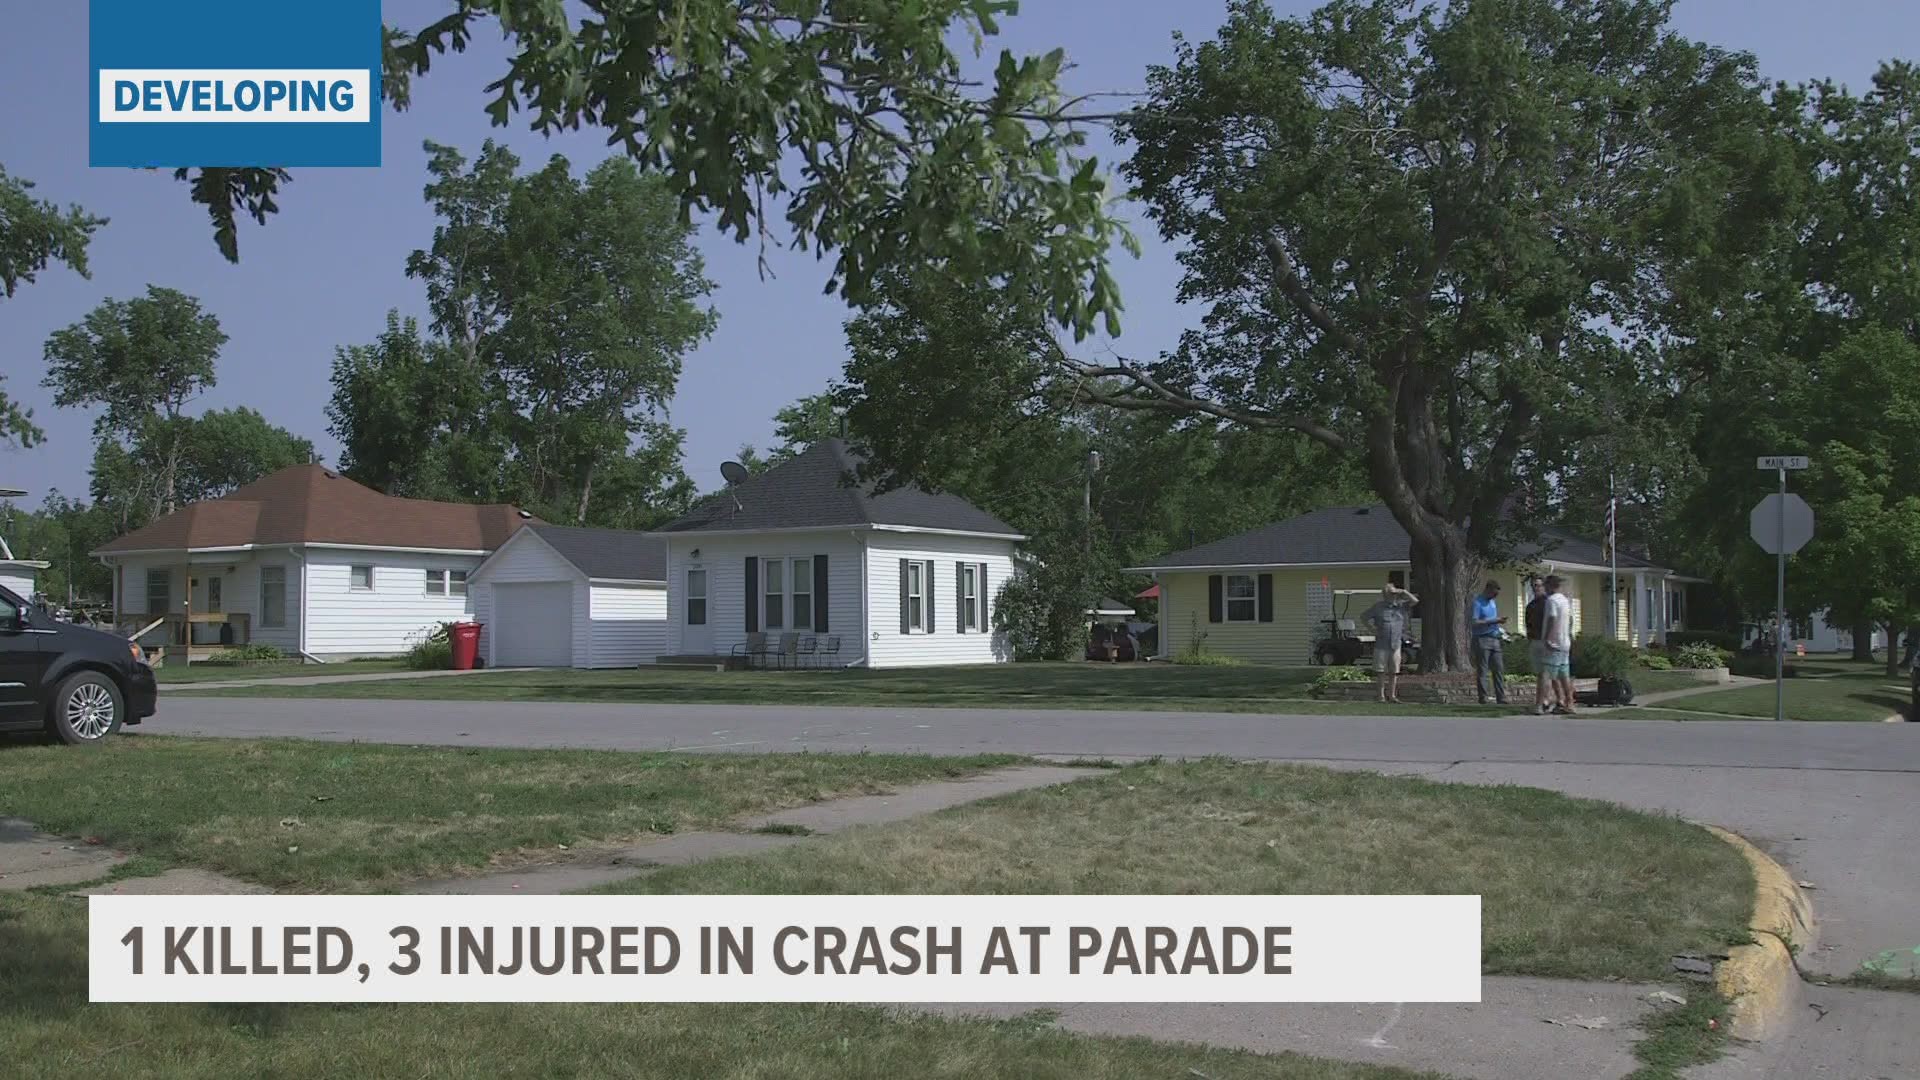 Iowa State Patrol identified the person who died at the Fourth of July parade as 59-year-old Mary Nienow. Three others were injured including a six-year-old child.